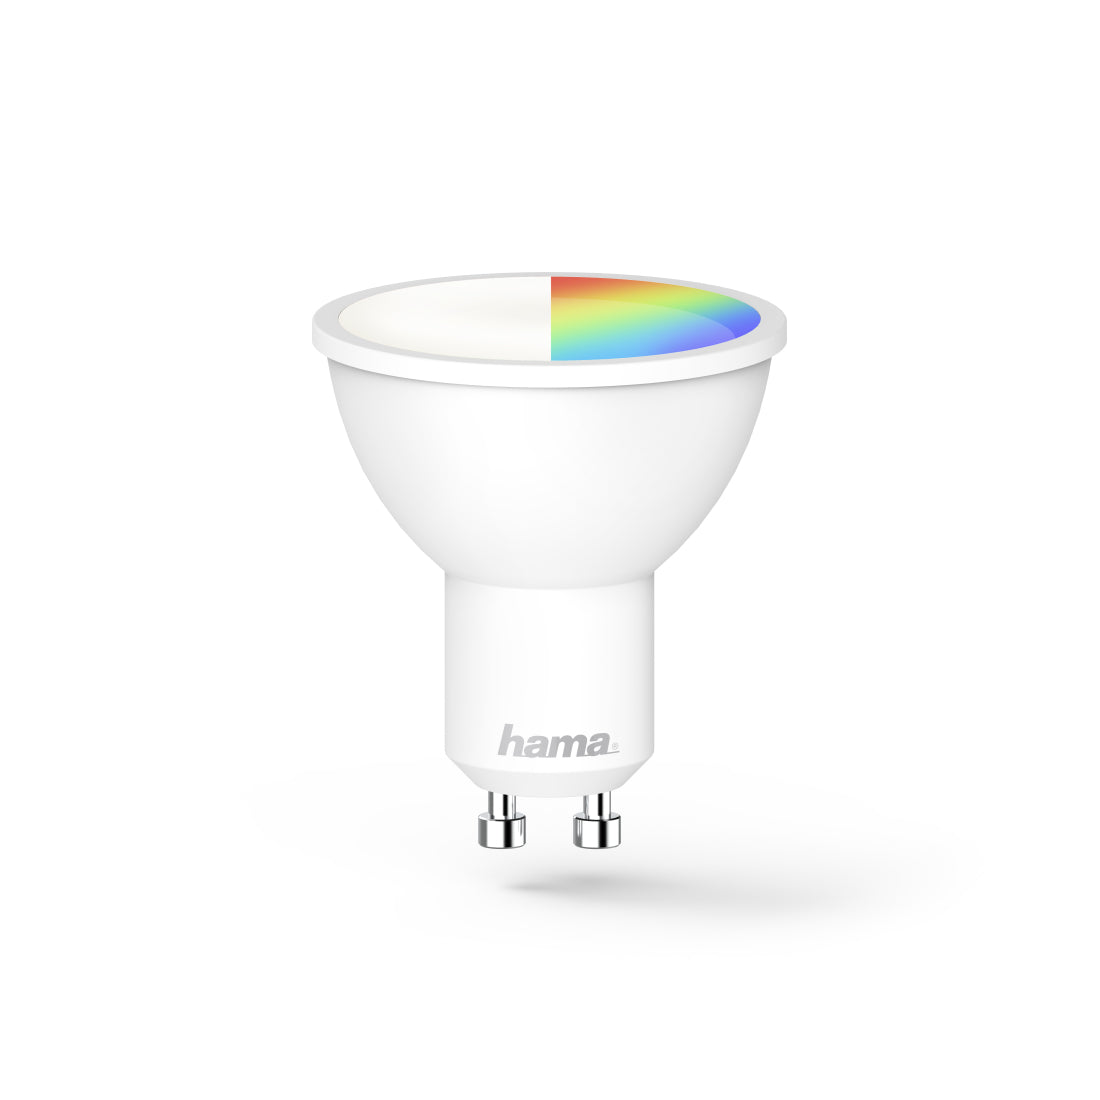 WiFi-LED Light HAMA, GU10, 5.5W, RGB+CCT, Can be Dimmed, 400Lm, for voice app/control